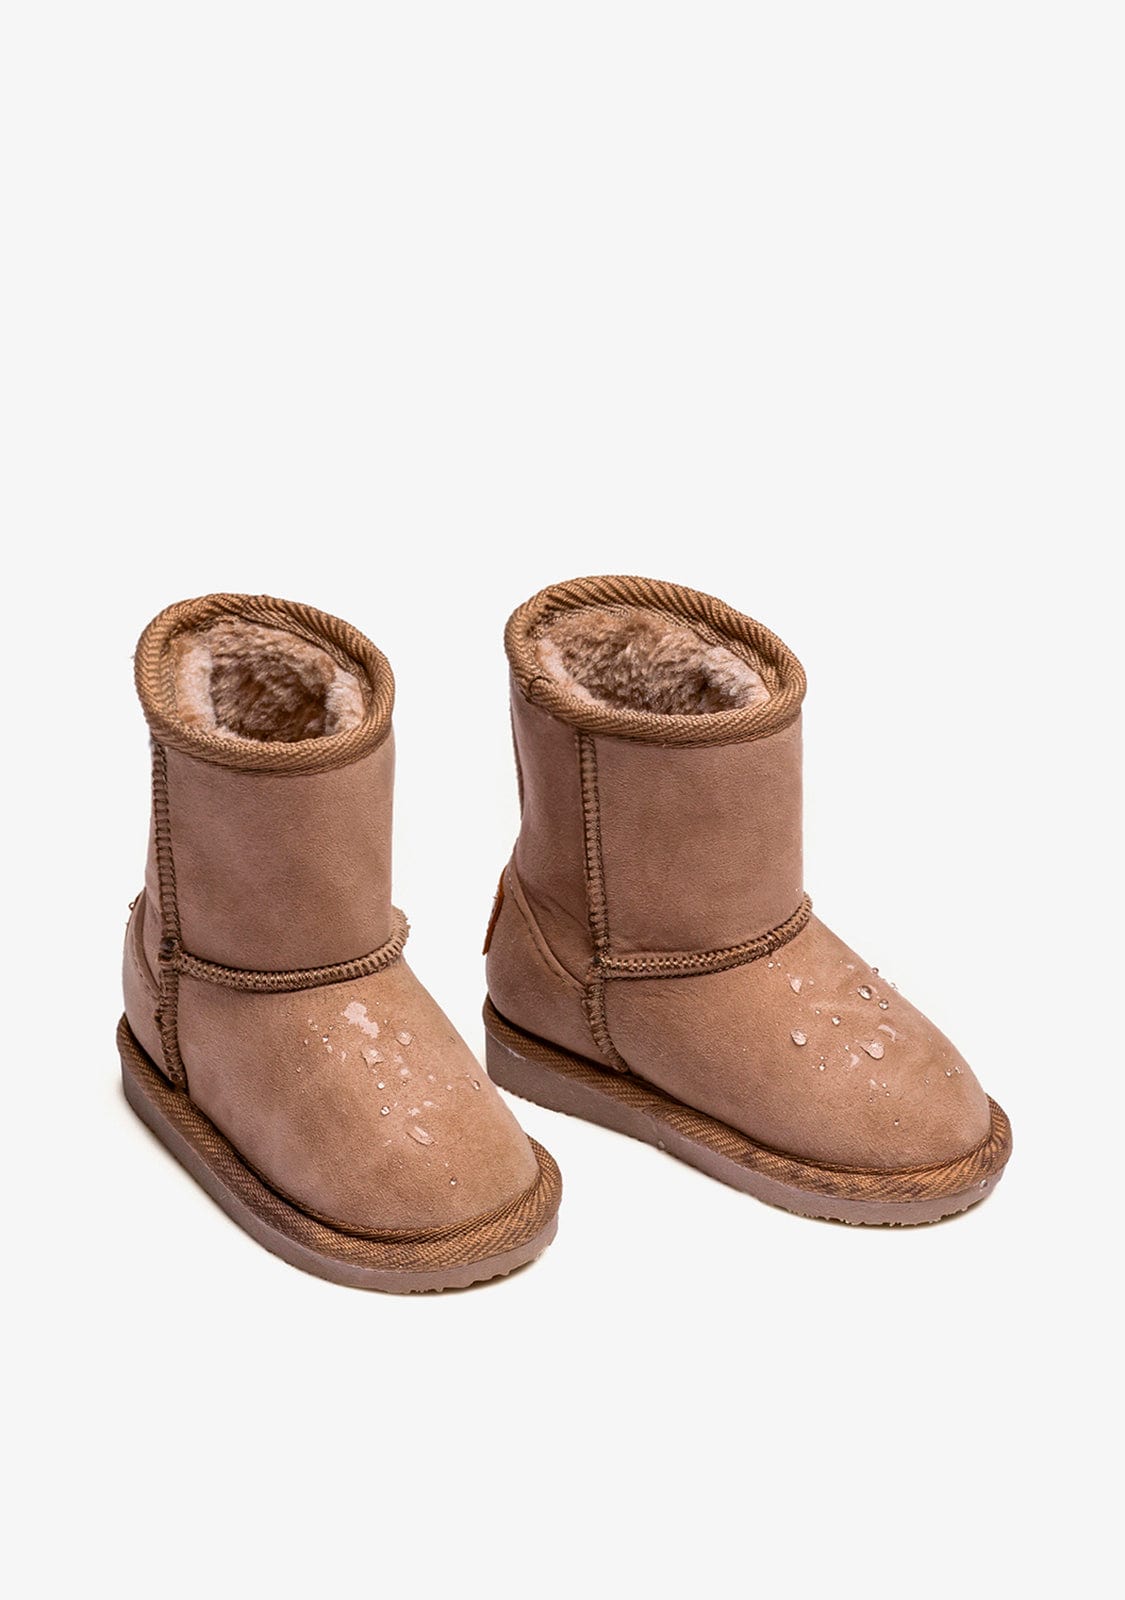 OSITO Shoes Baby's Australian Boots Taupe Water Repellent